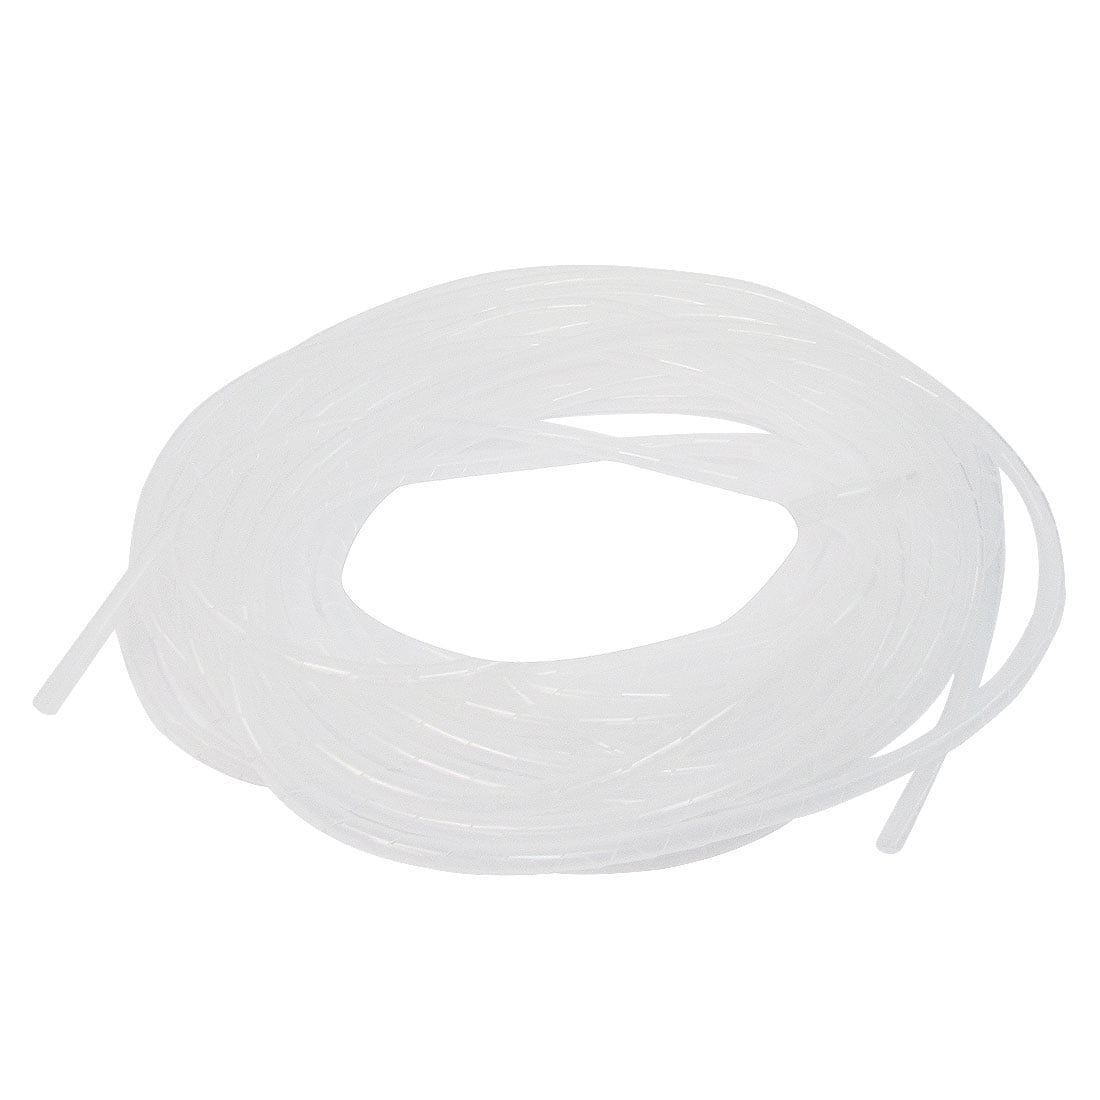 Spiral Cable Wire Wrap Tube Computer Manage Cord clear 16M 6mm 52.5FT 